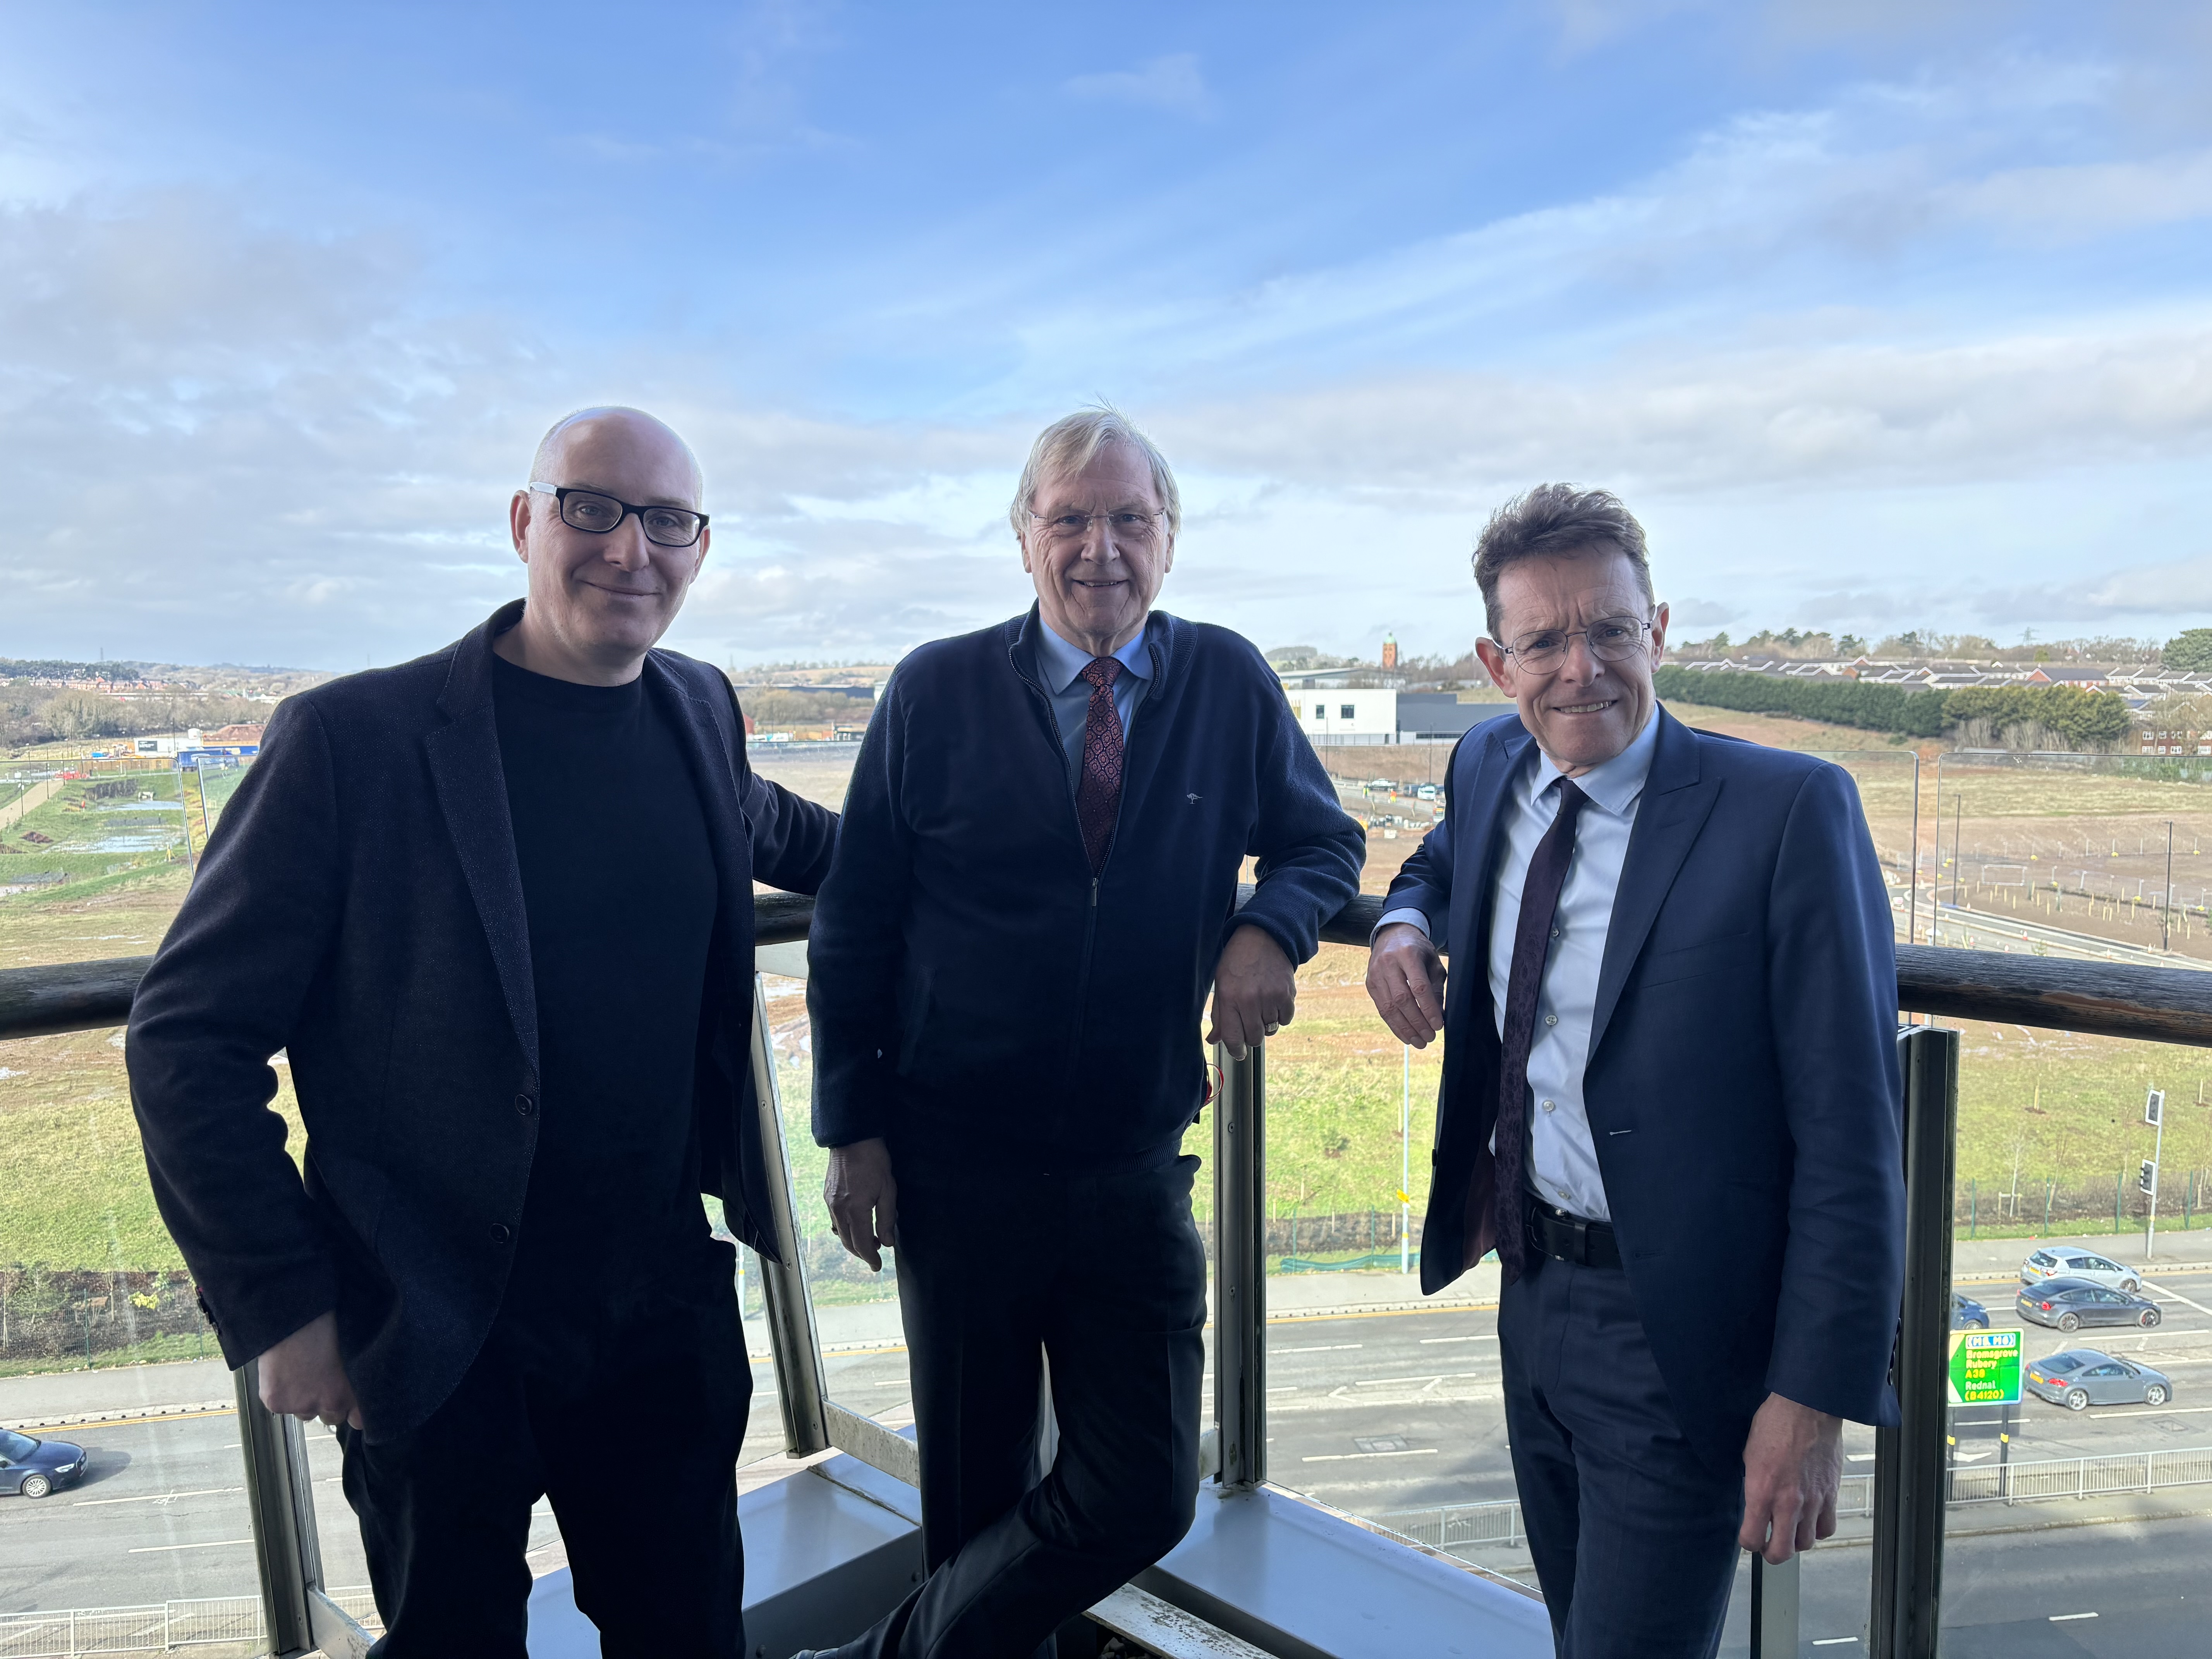 From L-R: Rob Flavell, Senior Director, St Modwens Homes; Cllr Ian Courts, Leader of Solihull Council and Portfolio Holder for housing and land at the WMCA, and Andy Street, Mayor of the West Midlands and Chair of the WMCA.